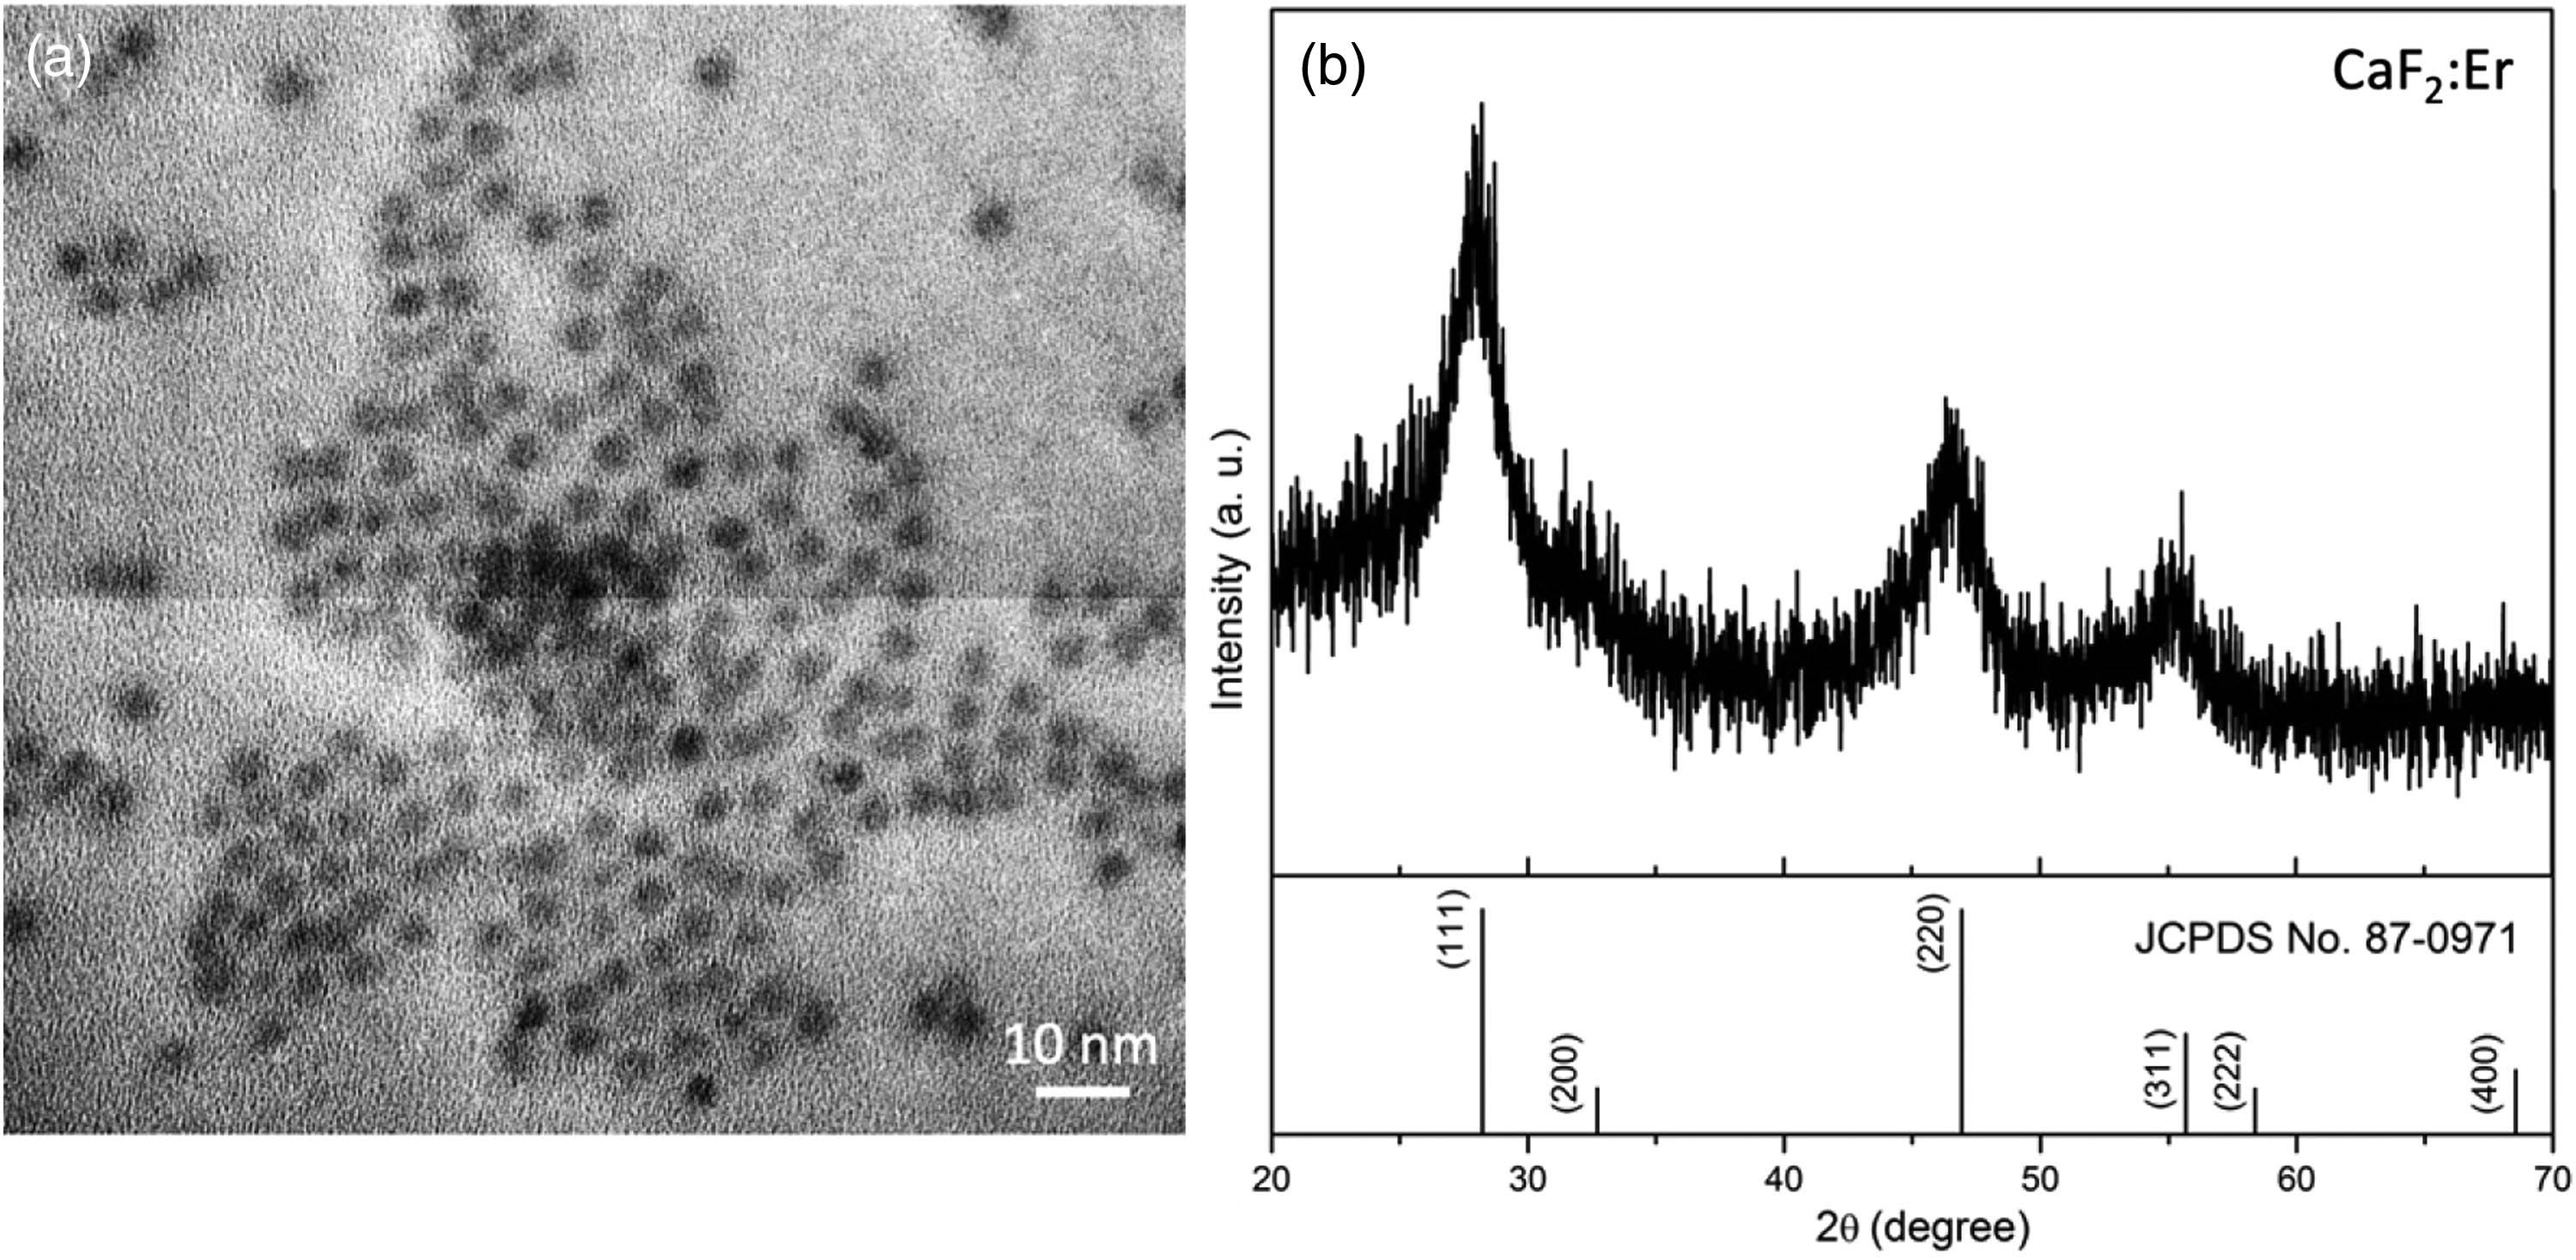 (a) TEM image and (b) powder XRD pattern of CaF2:Er3+ nanoparticles.